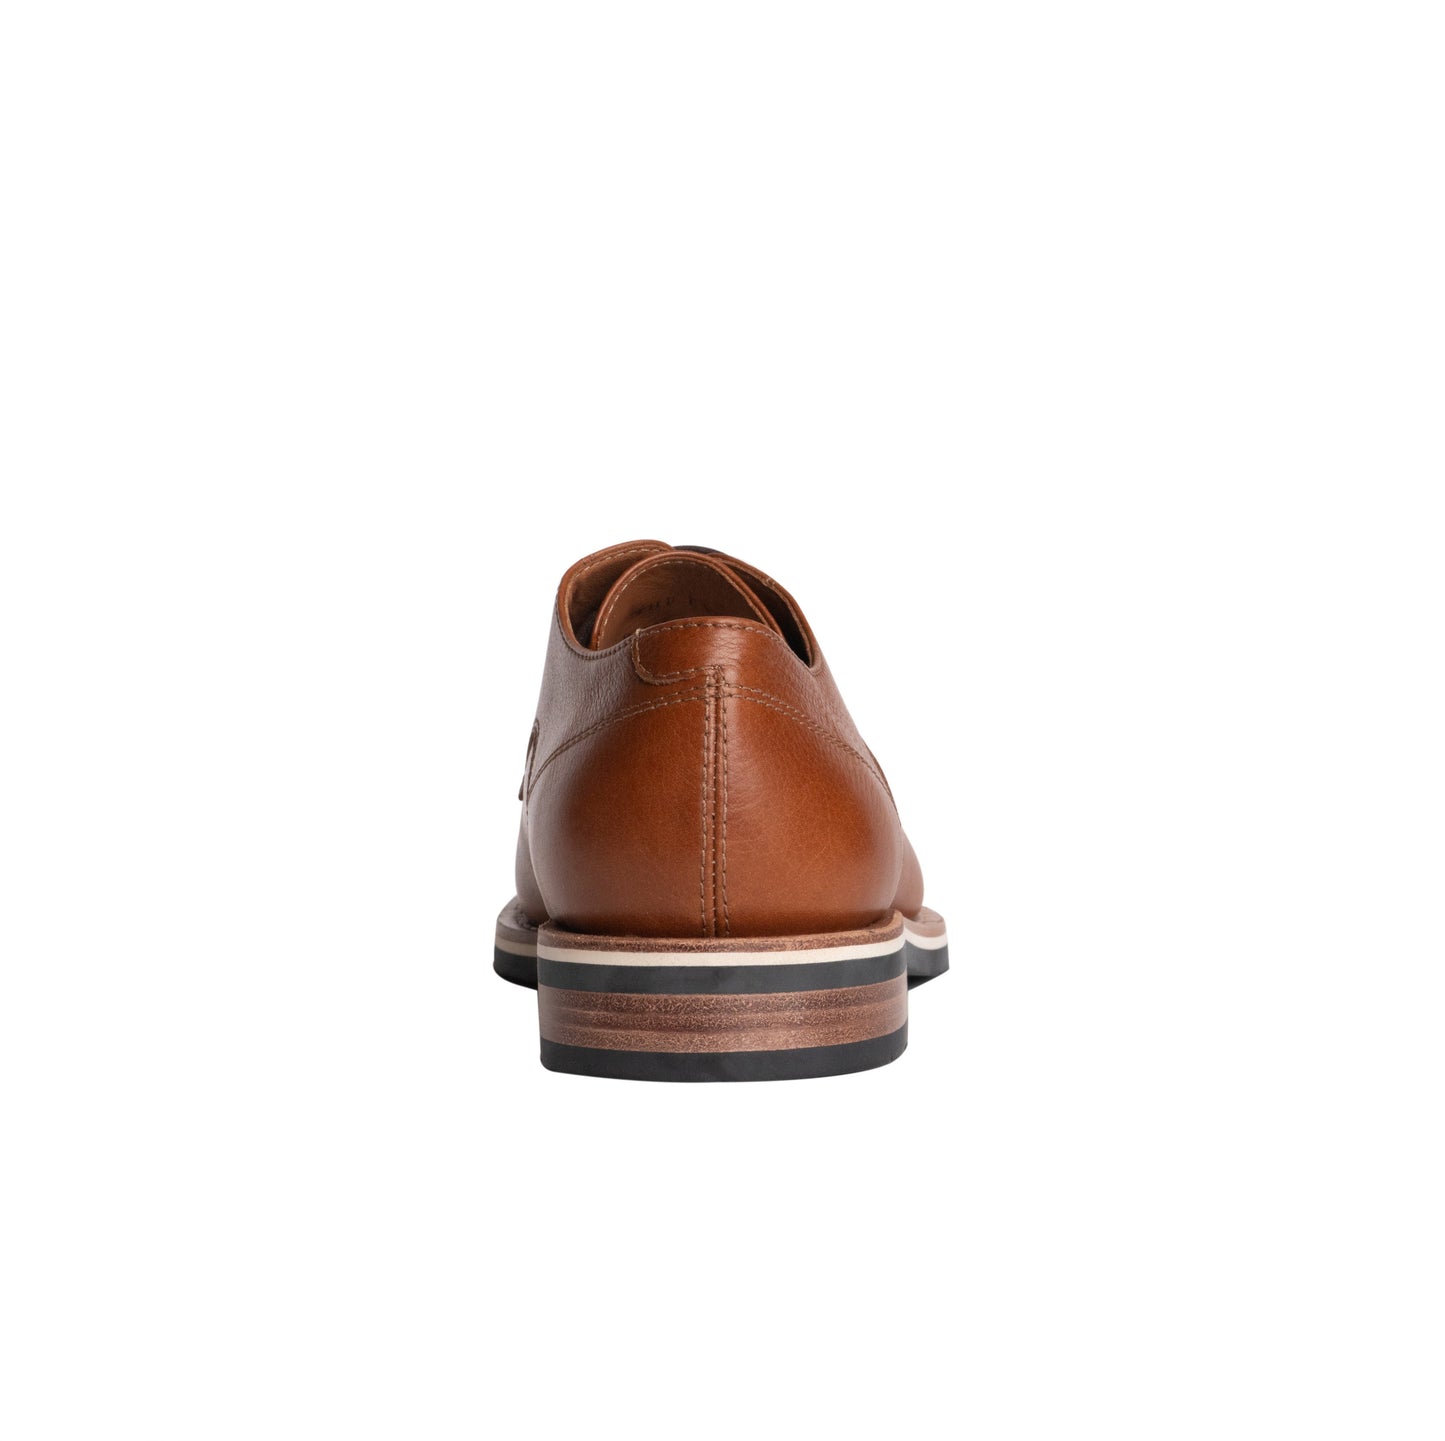 HELM Shoes The Evans Whiskey